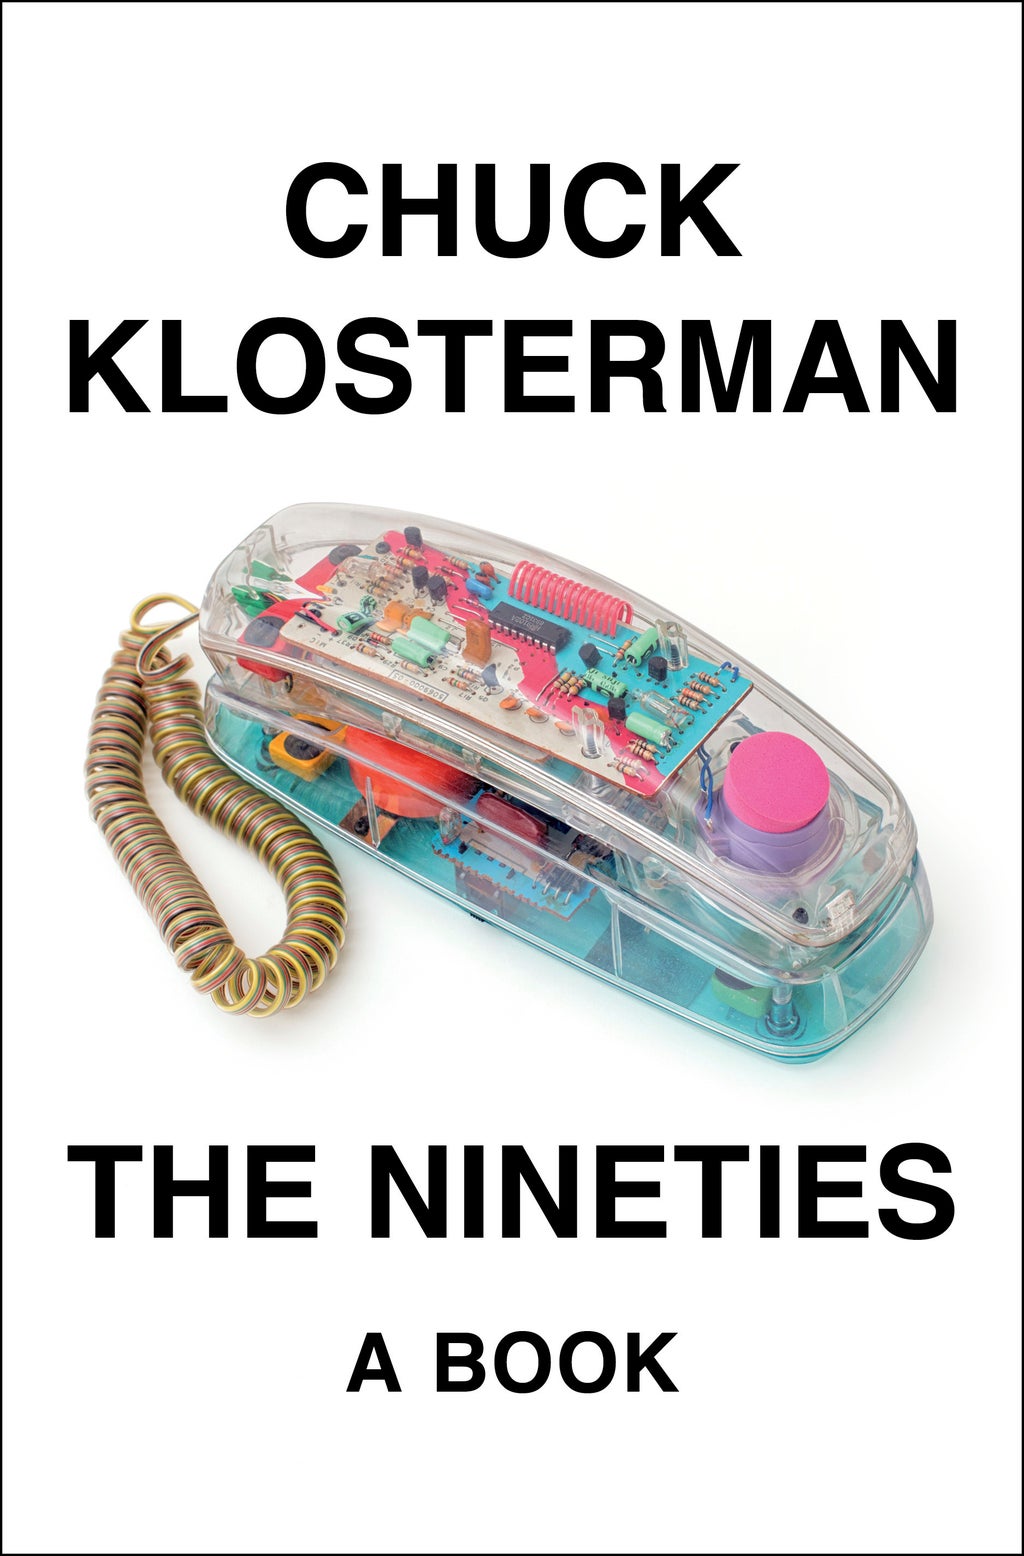 Review: Chuck Klosterman deep dives into ’The Nineties' 